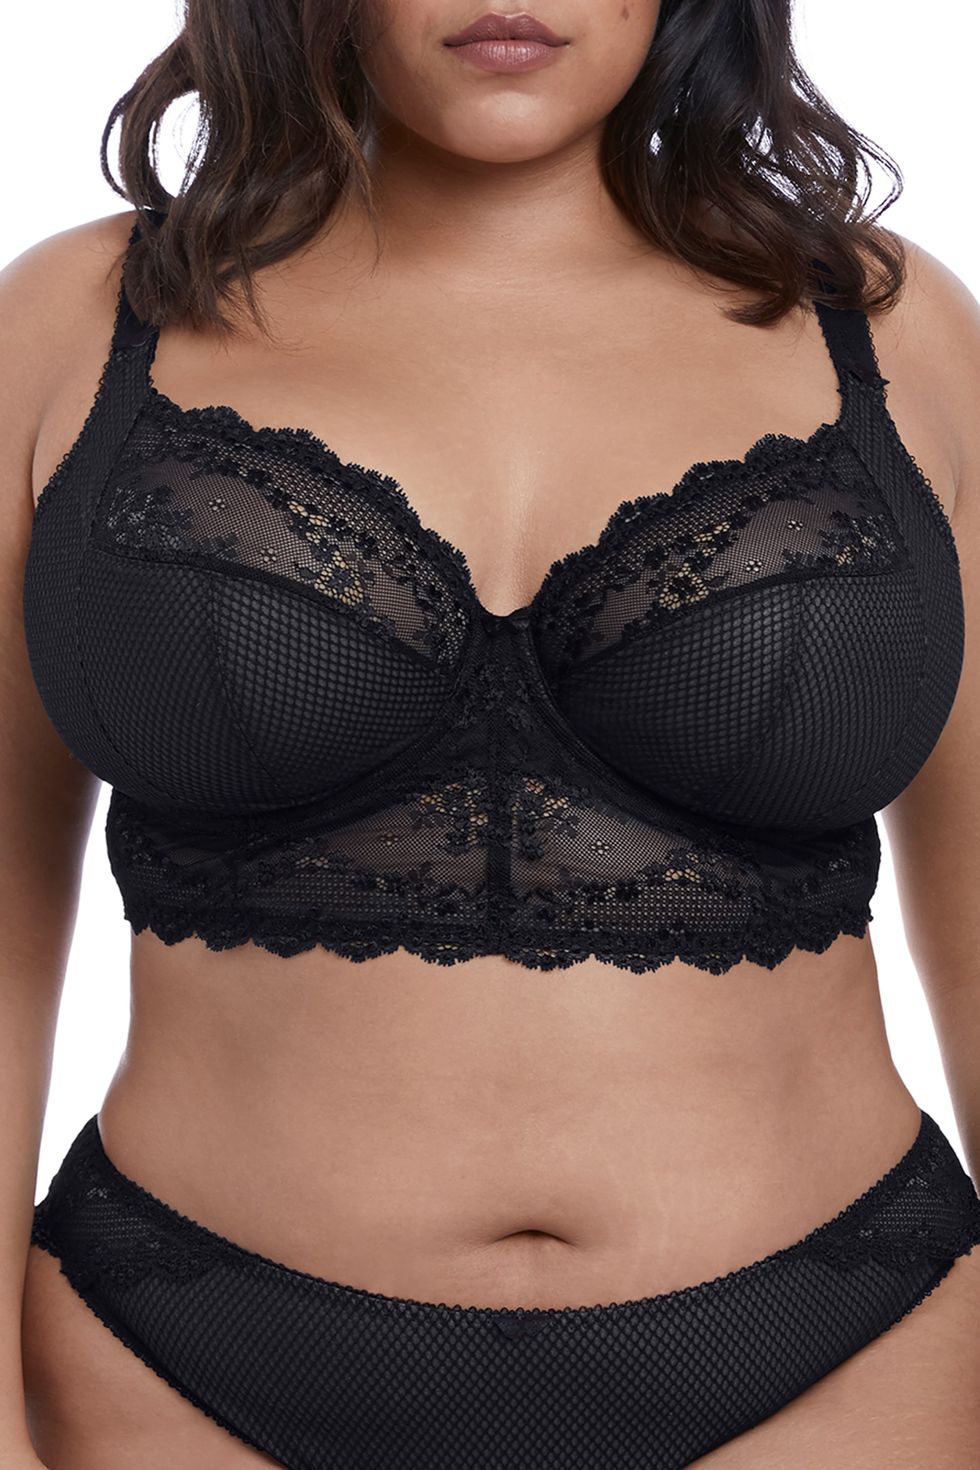 SEXY BRAS FOR BIG BOOBS, Where to get cute bras?